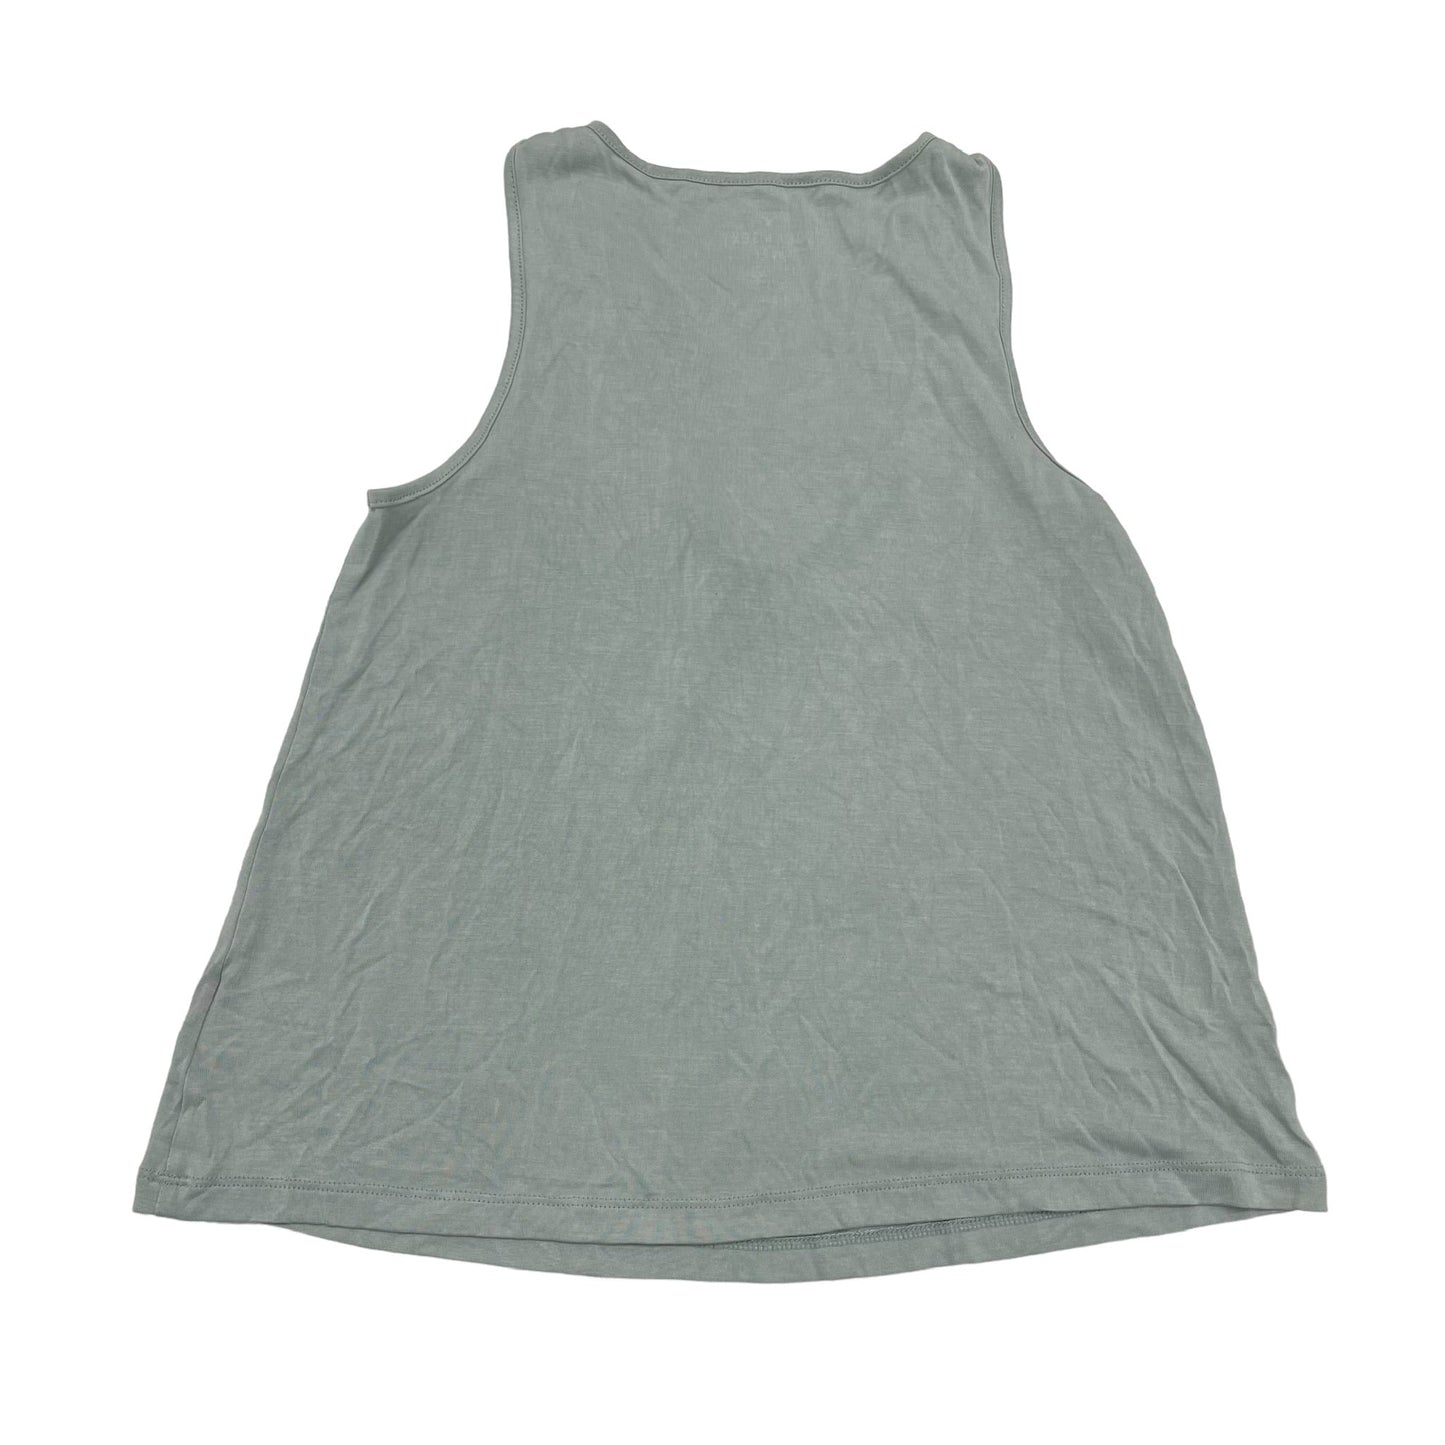 Green Top Sleeveless American Eagle, Size Xs